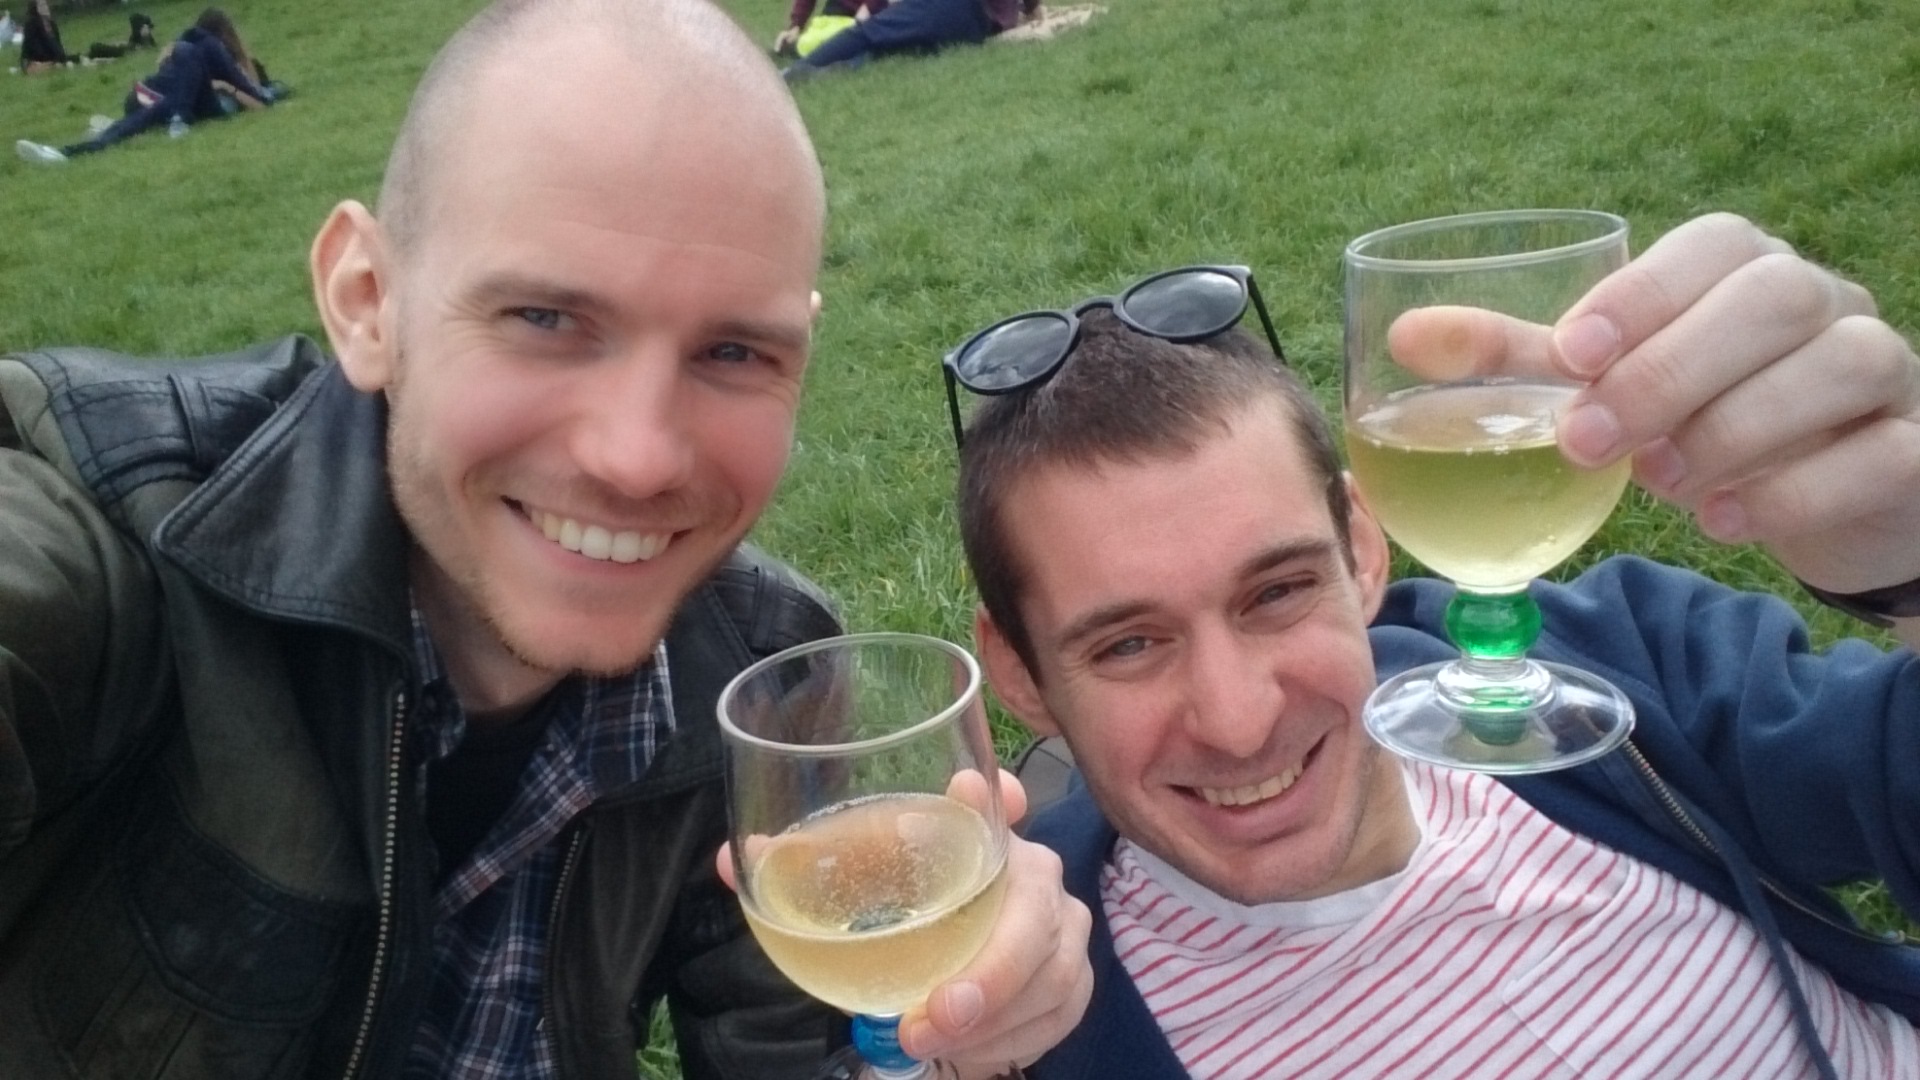 Frédéric to the right and myself to the left celebrating our run with some bubbly wine.